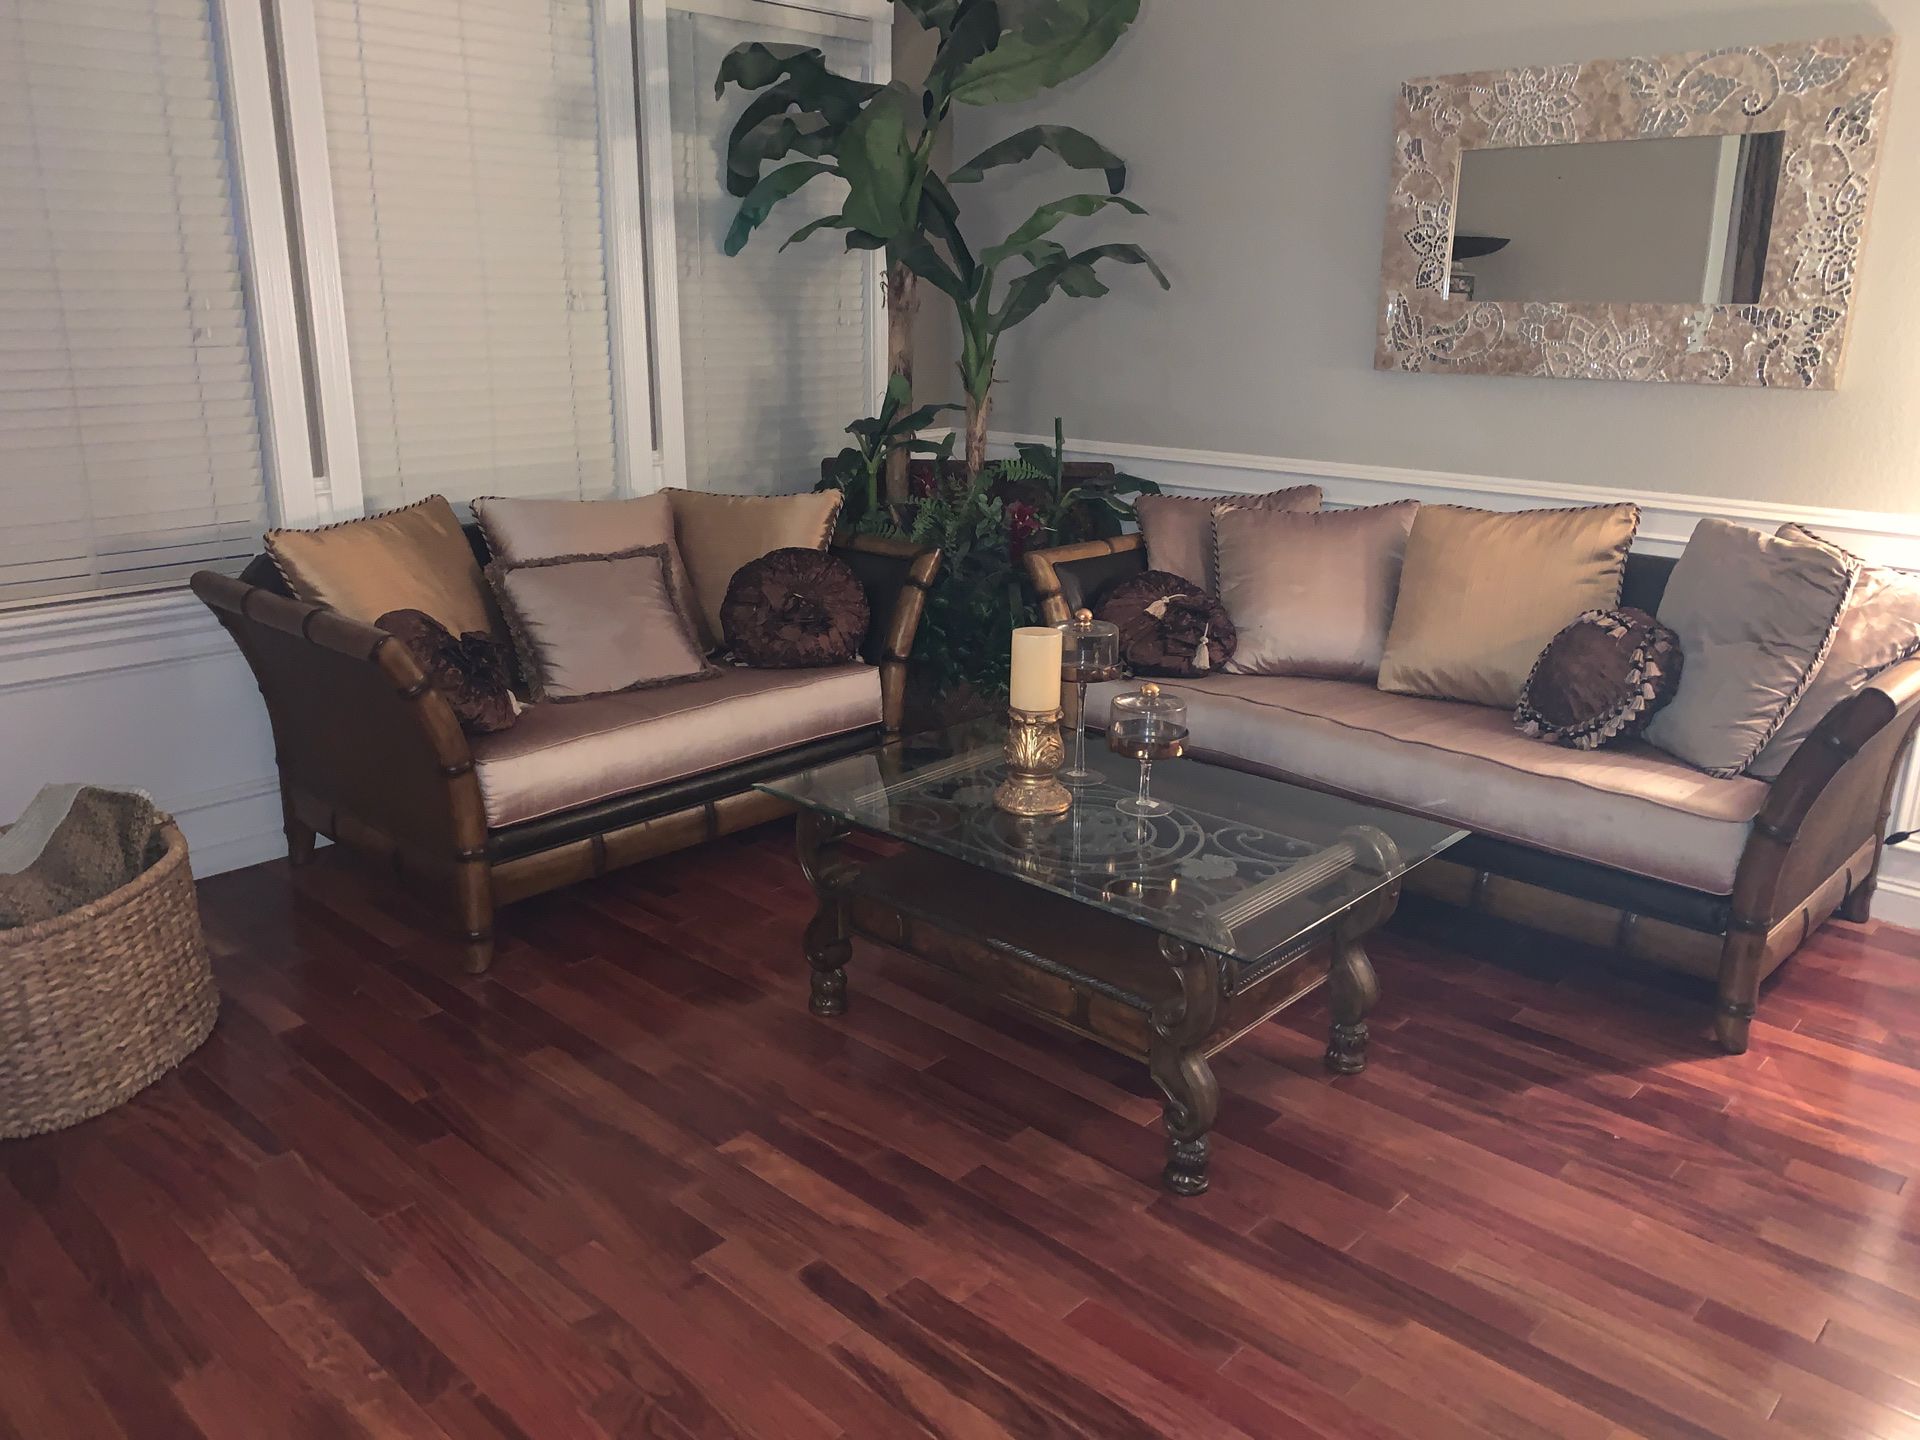 Living room set (6 piece sofa, loveseat, coffee table, end table and console table)